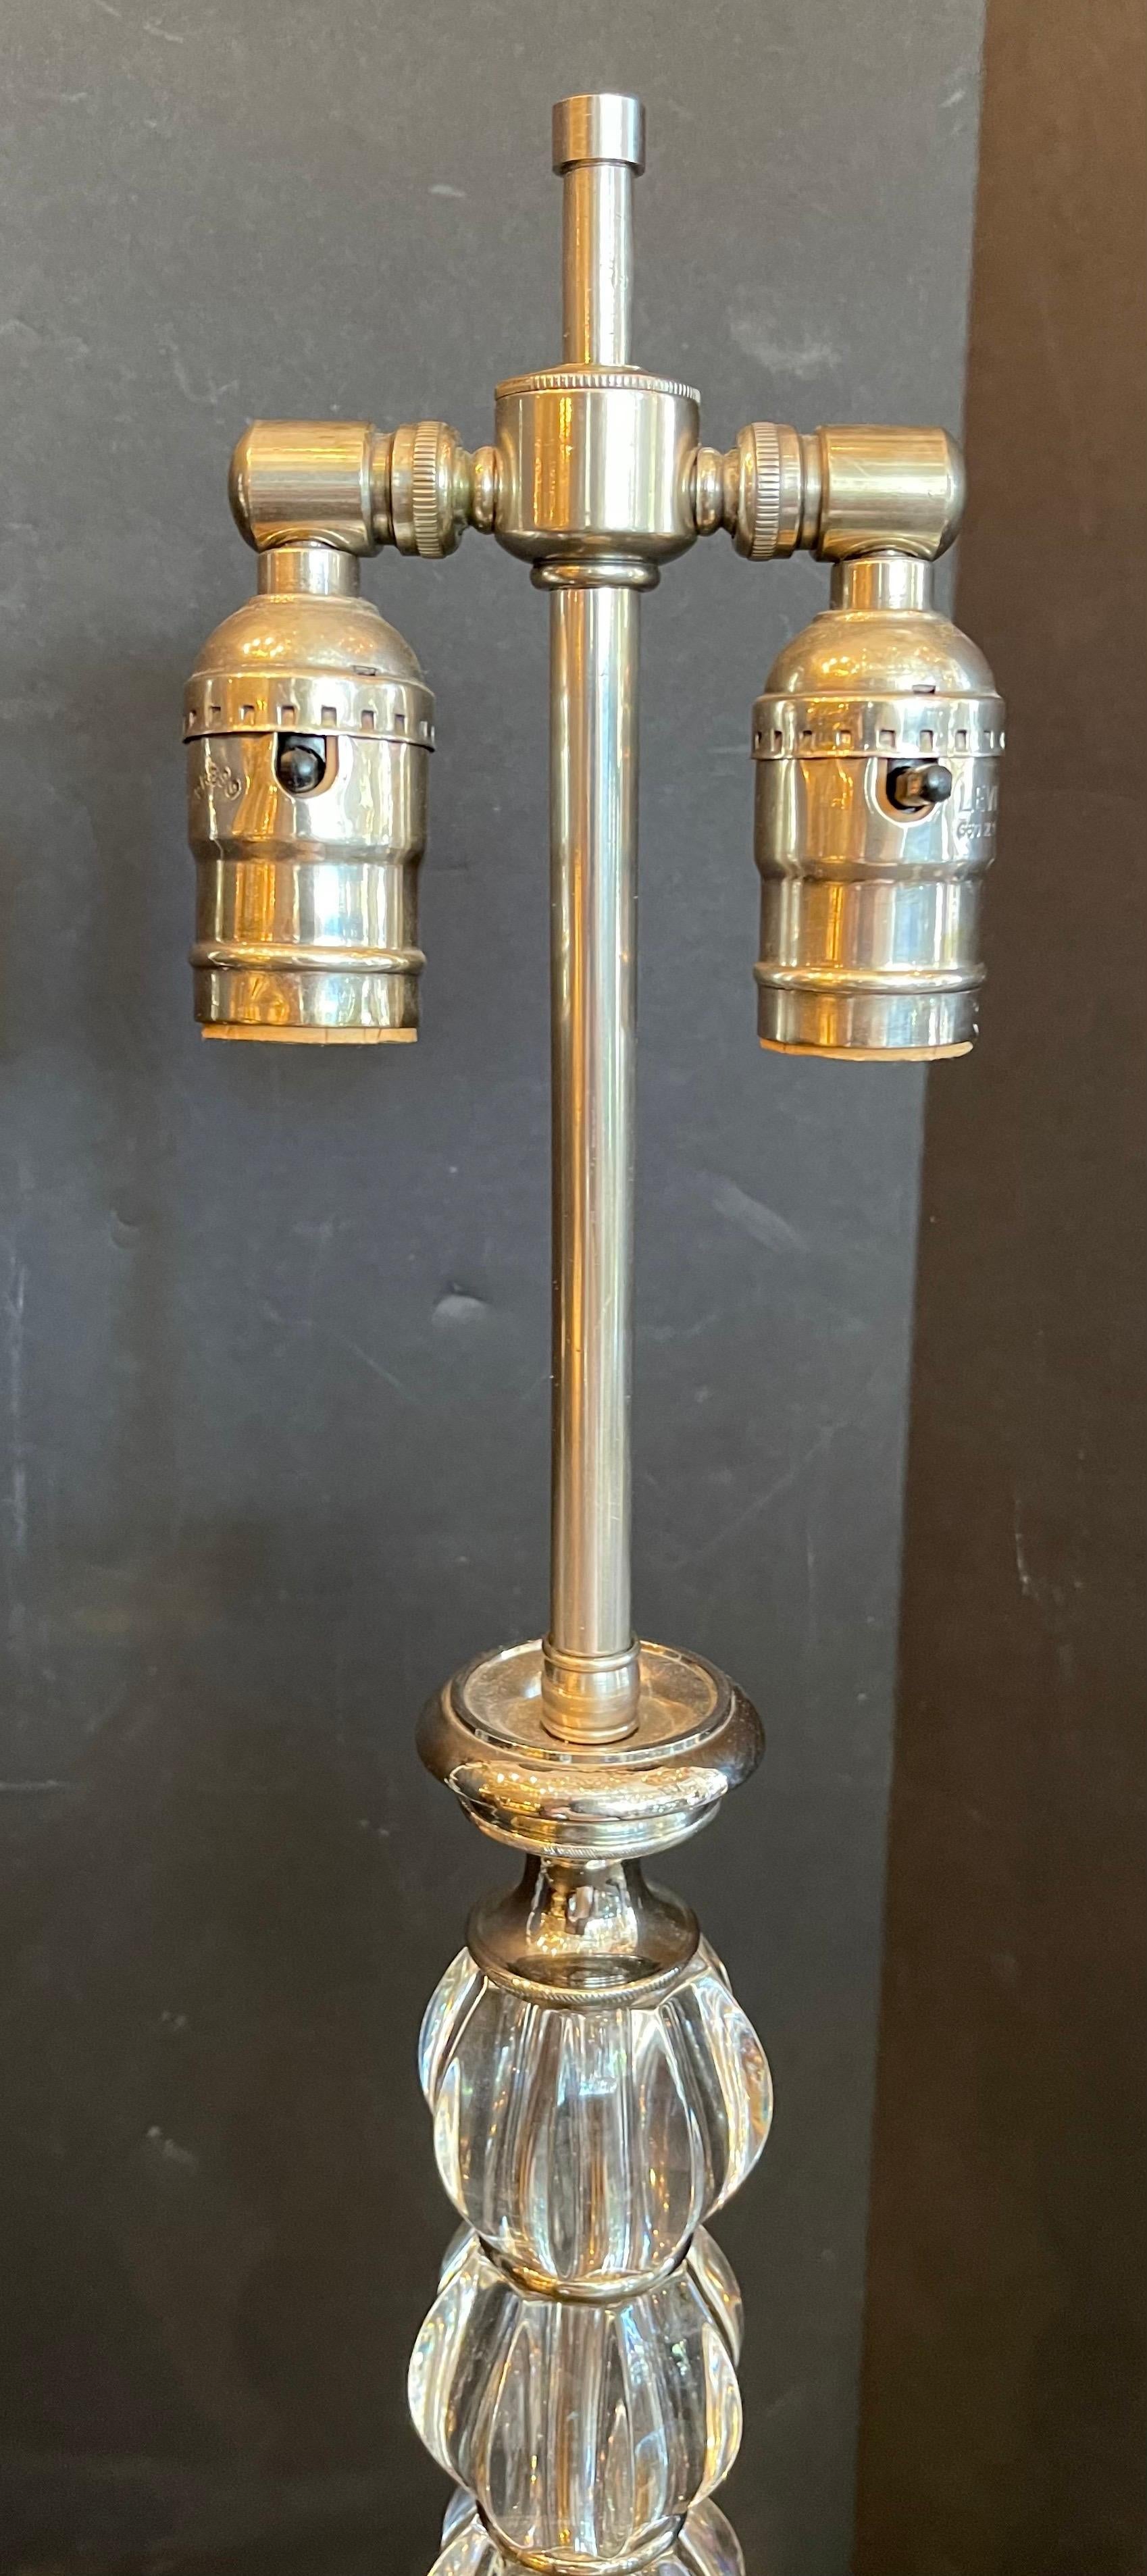 French Wonderful Mid-Century Modern Crystal Polished Nickel Chrome Pair Baccarat Lamps For Sale